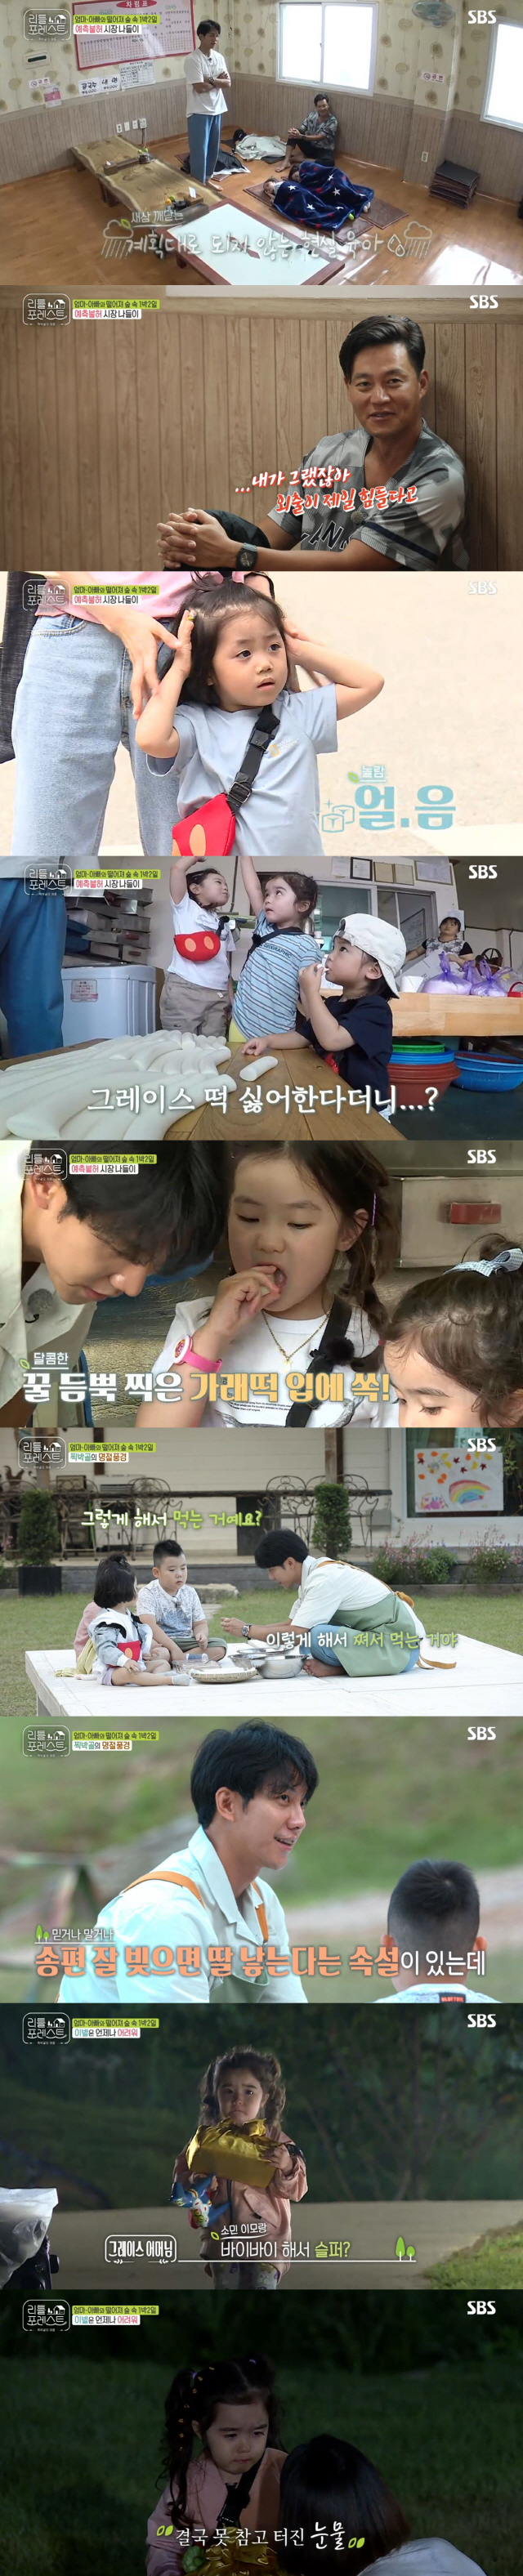 SBSs entertainment Little Forest soared to 6.1% of the highest audience rating per minute.On the 17th, SBS Little Forest depicted Lee Seo-jin, Lee Seung-gi, Park Na-rae and Jung So-min, who were in the market for Chuseok with Little.The carers and the Littles headed to the market to buy the ingredients for the holiday food, and the Littles were excited about the first market outing with The Uncle and Auntie.But the excitement was also a moment, and Lee Seung-gi and Lee Seo-jin lamented that if you have children, there is nothing that you think is going to happen.Lee Seung-gi and Lee Seo-jin sighed when they lay the Littles in Restaurant.In the meantime, Park Na-rae and Jung So-min had a good time watching the process of popping with Lee Han and Ye Jun.Waking up, Eugene, Grace and Gaon headed for the market mill with Lee Seung-gi, who were happy to eat freshly-made rice cakes in honey.Since then, I have bought hot dogs in the market and enjoyed a pleasant outing with lunch together.After returning home after finishing the shopping, they started making Chuseok food such as Songpyeon and the war.Following the demonstration of Lee Seung-gi The Uncle, The Master of Songpyeon, Little also participated in the songpyeon debt.The family-like appearance of preparing Chuseok food together made me smile.In particular, Lee Seung-gi said, Is not there a myth that you will have a daughter if you make a songpyeon well?Little Lee enjoyed a generous dinner with the finished Songpyeon and Chuseok food.Later, the breakup time came for Littles to take their familys hands and return. Grace stopped and started crying.To her mother, who asked why, Grace cried, I miss Aunt Somin. The scene soared to 6.1 percent per minute of ratings, taking the best minute.SBS Little Forest is broadcast every Monday and Tuesday at 10 pm.